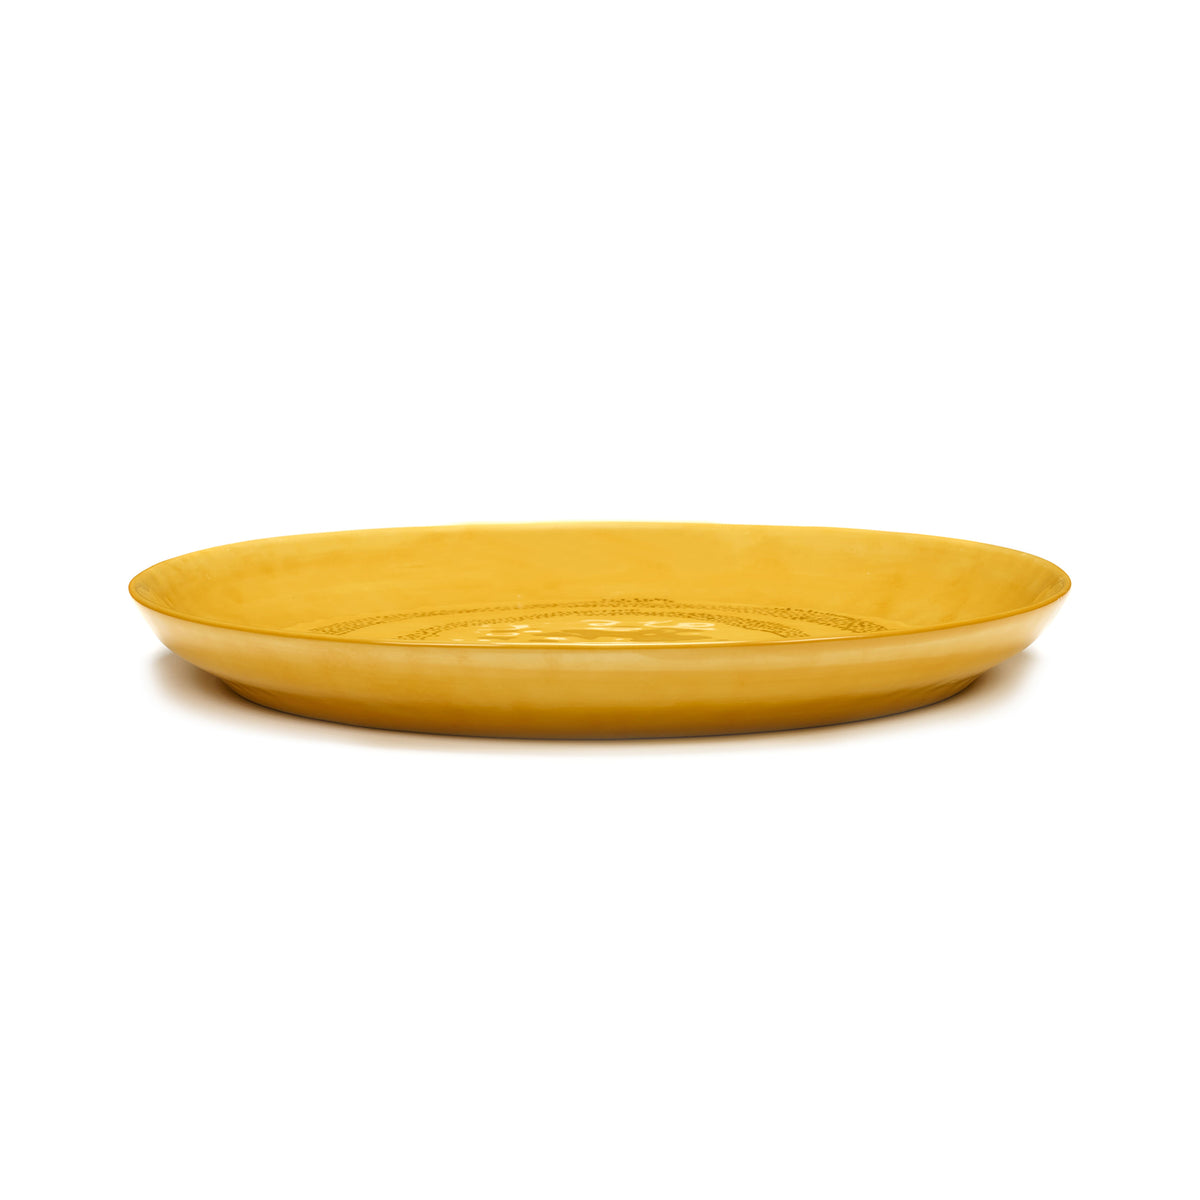 Sunny Yellow Serving Plate with Black Dots - M